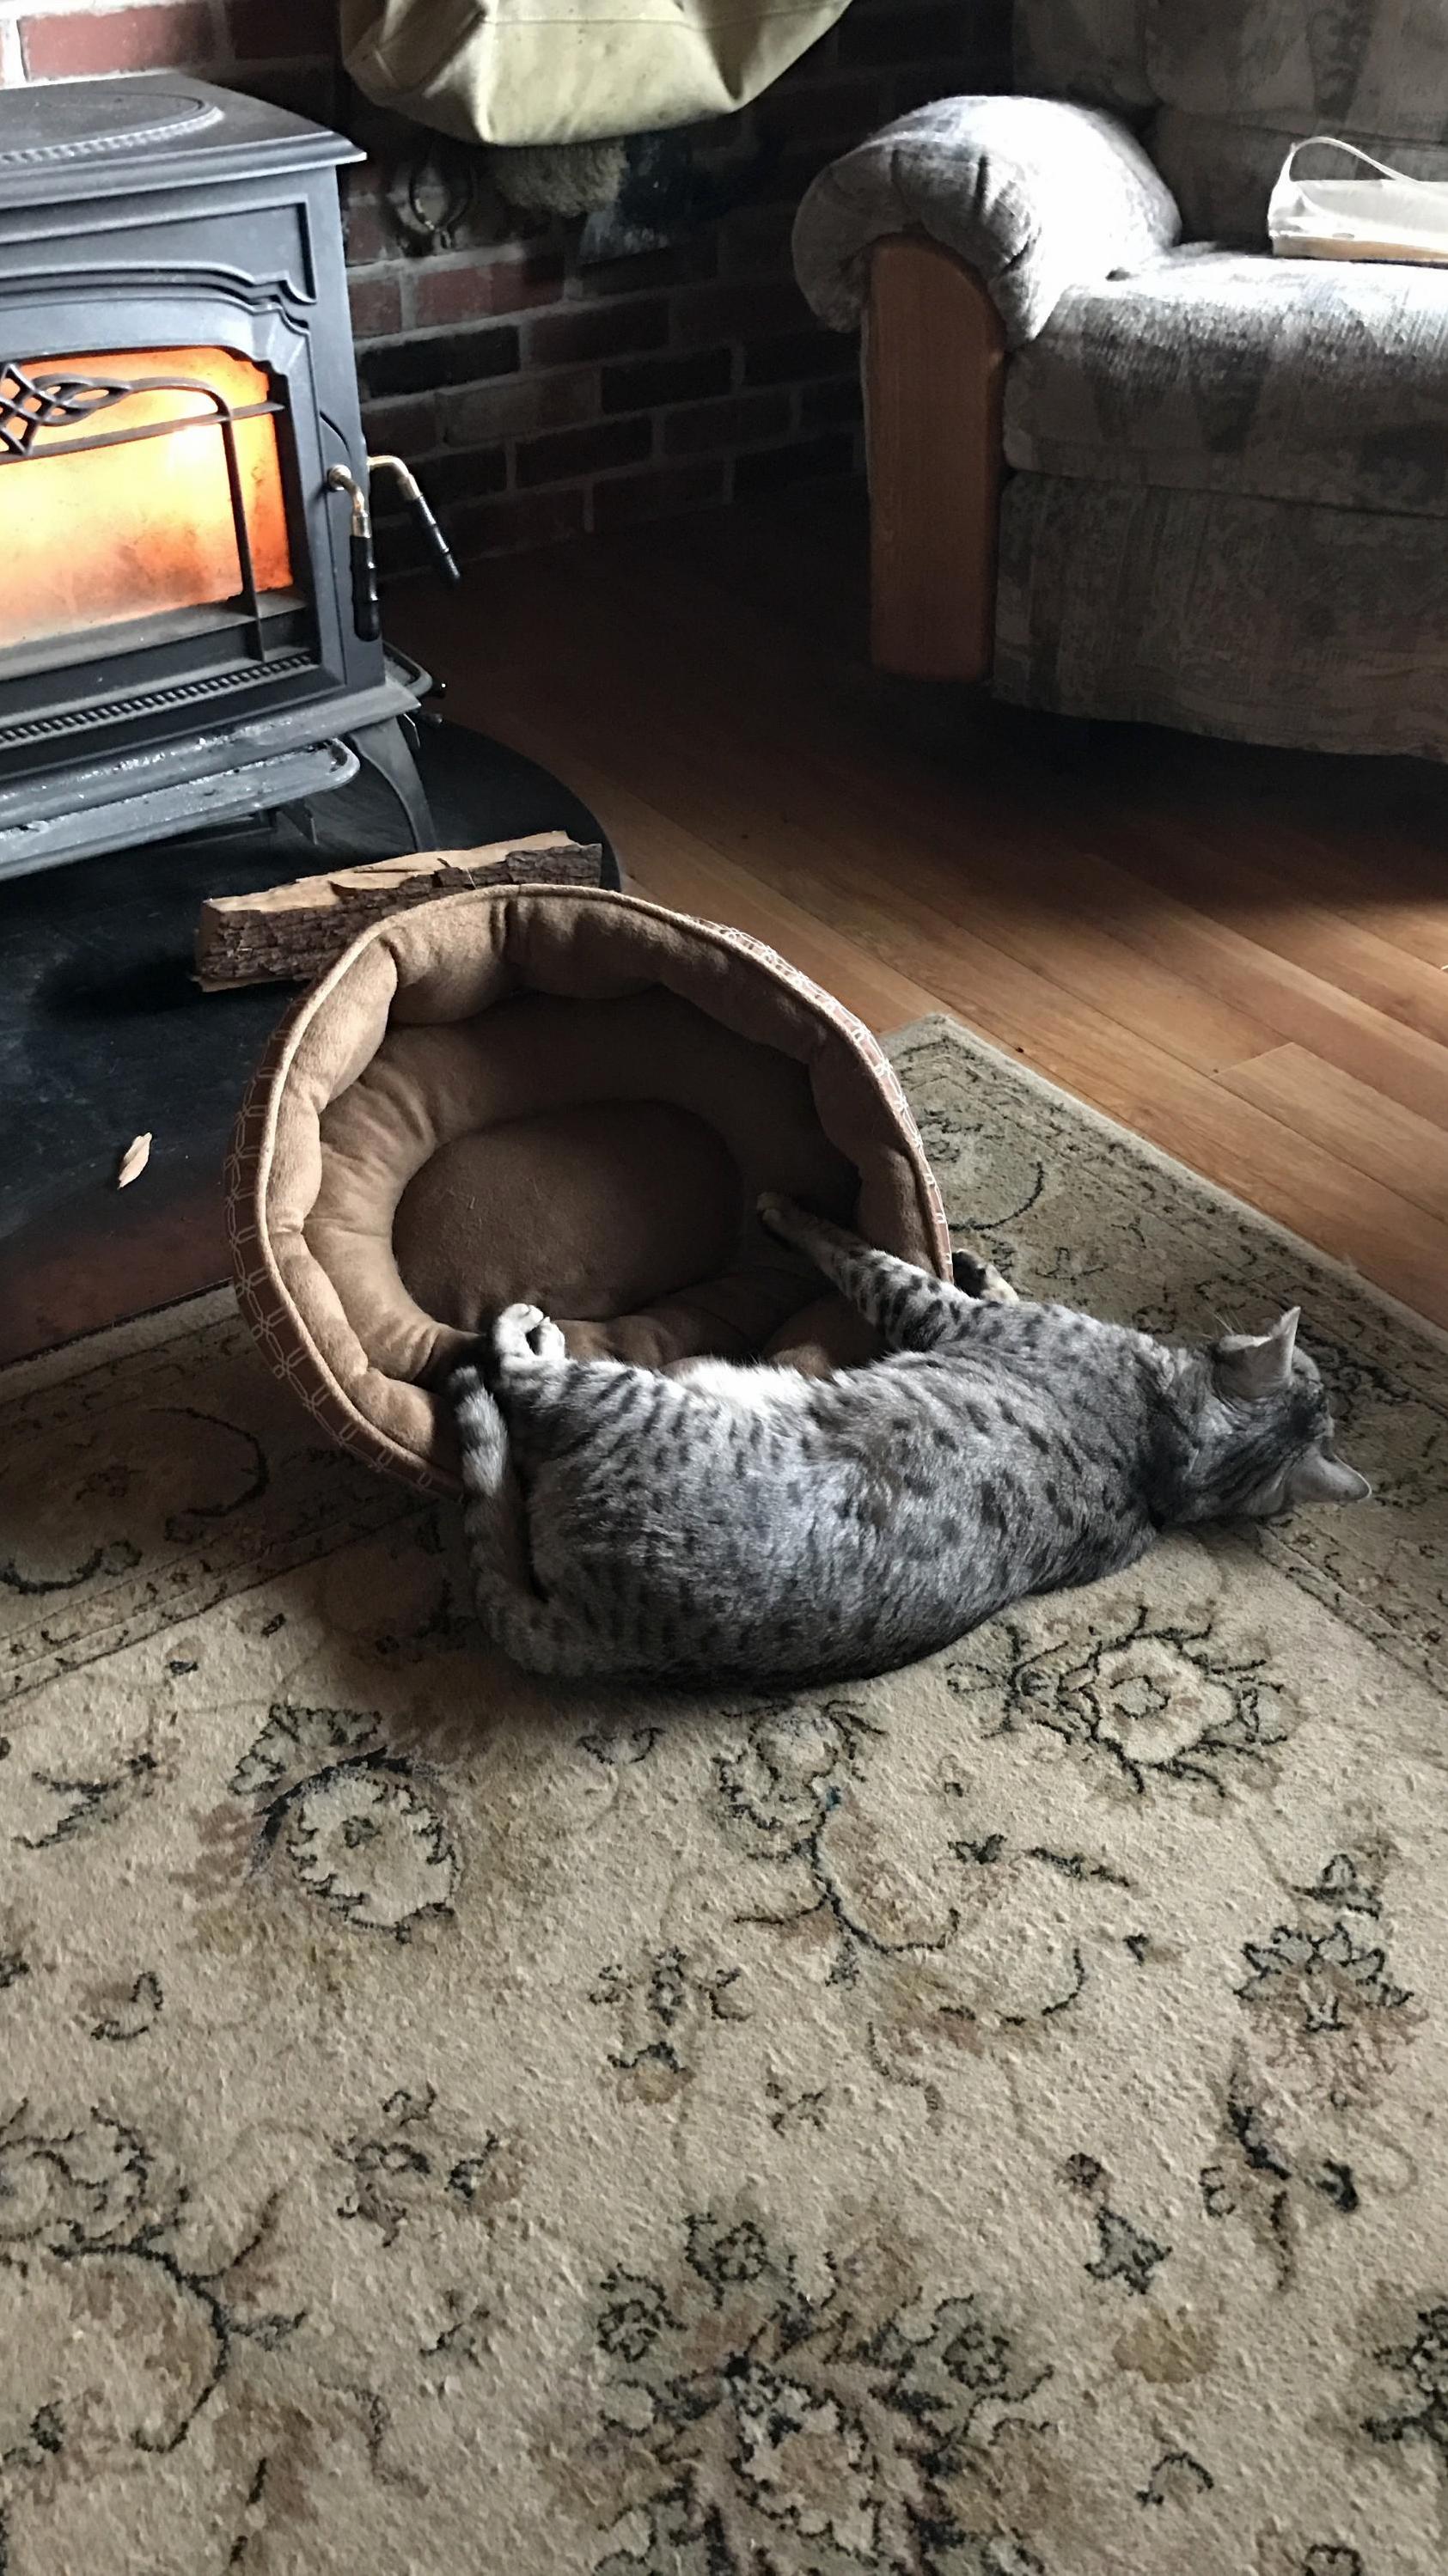 My cat fell out of her bed and was too lazy to care